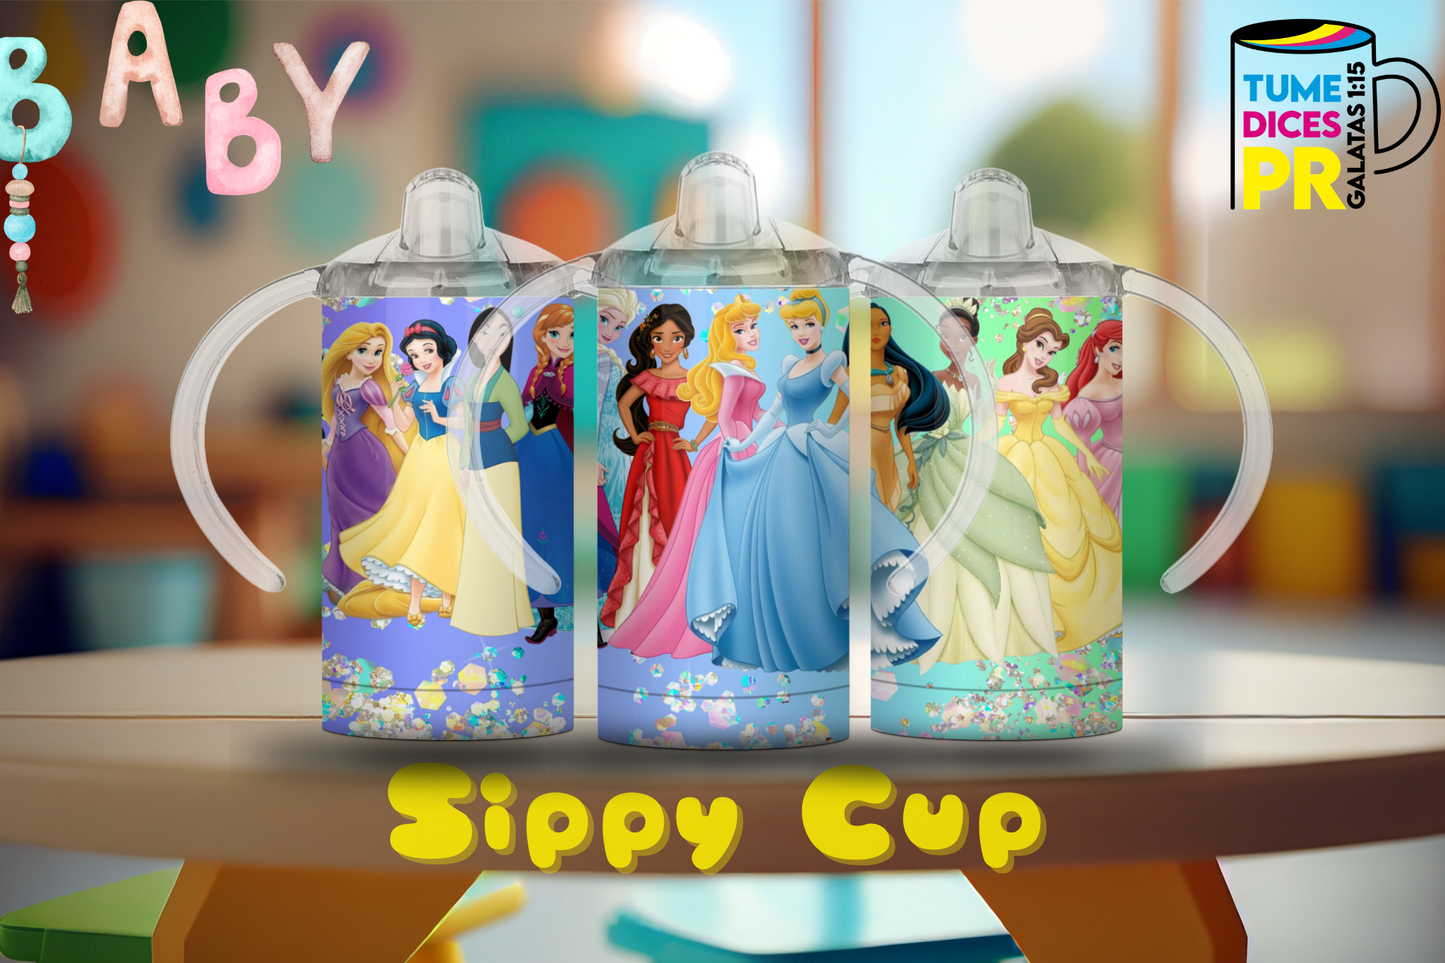 Sippy Cup 5